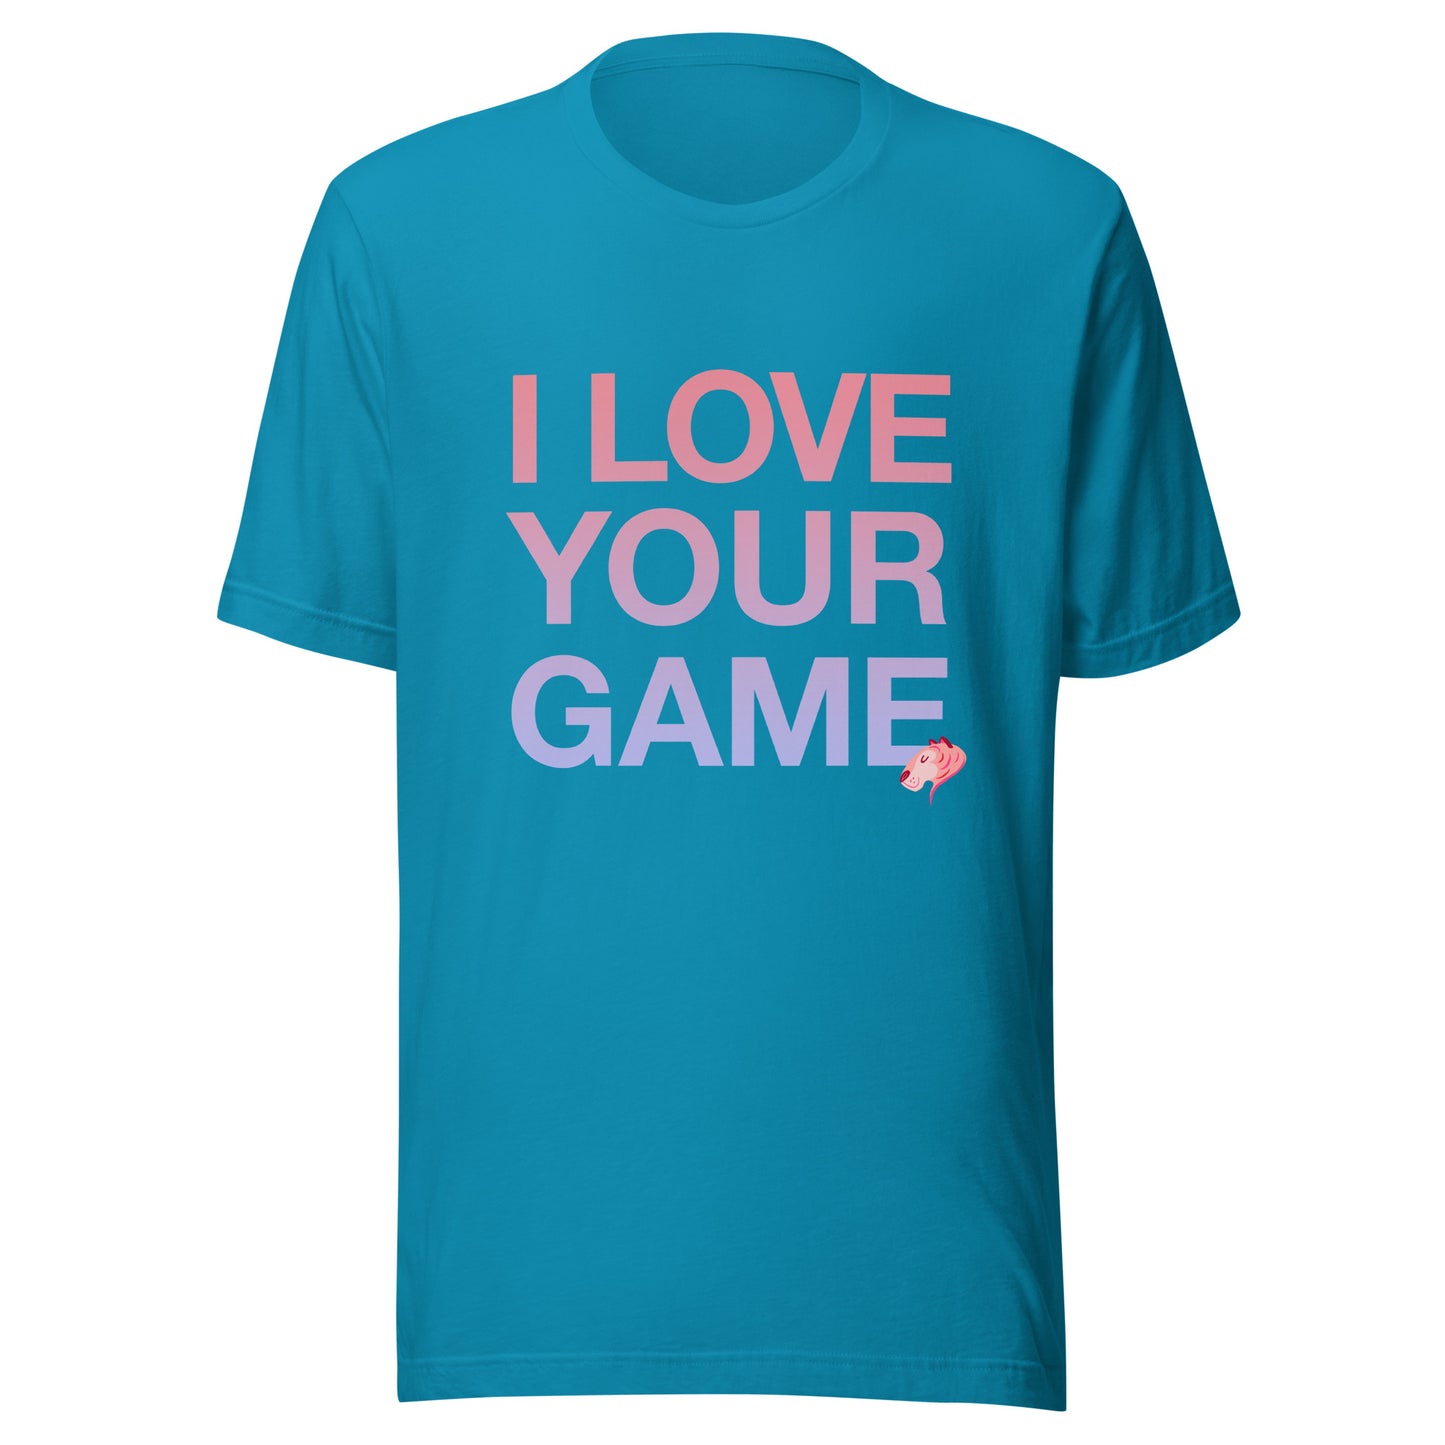 I LOVE YOUR GAME Unisex t-shirt